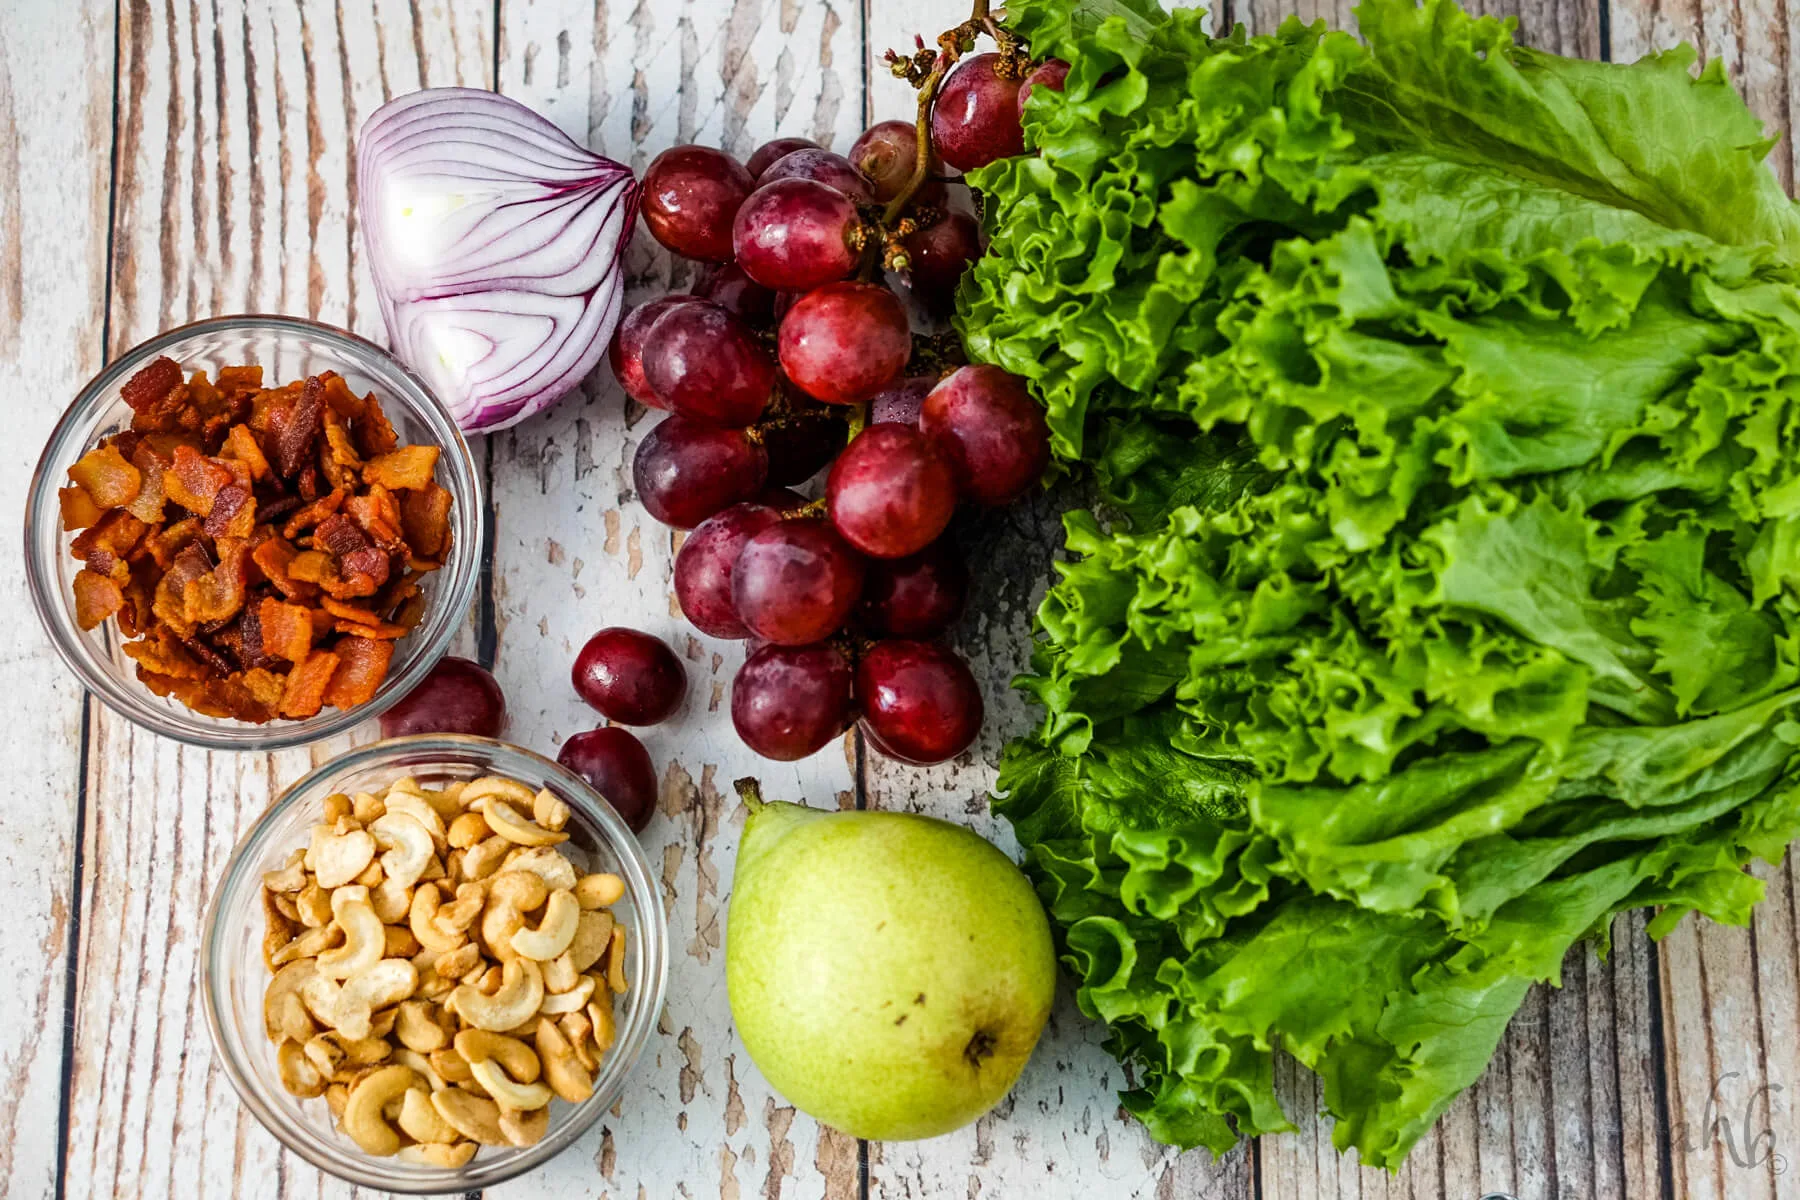 A head of lettuce, a pear, some red seedless grapes, half of a red onion, a bowl of bacon pieces and a bowl of cashew halves and pieces sit next to each other.